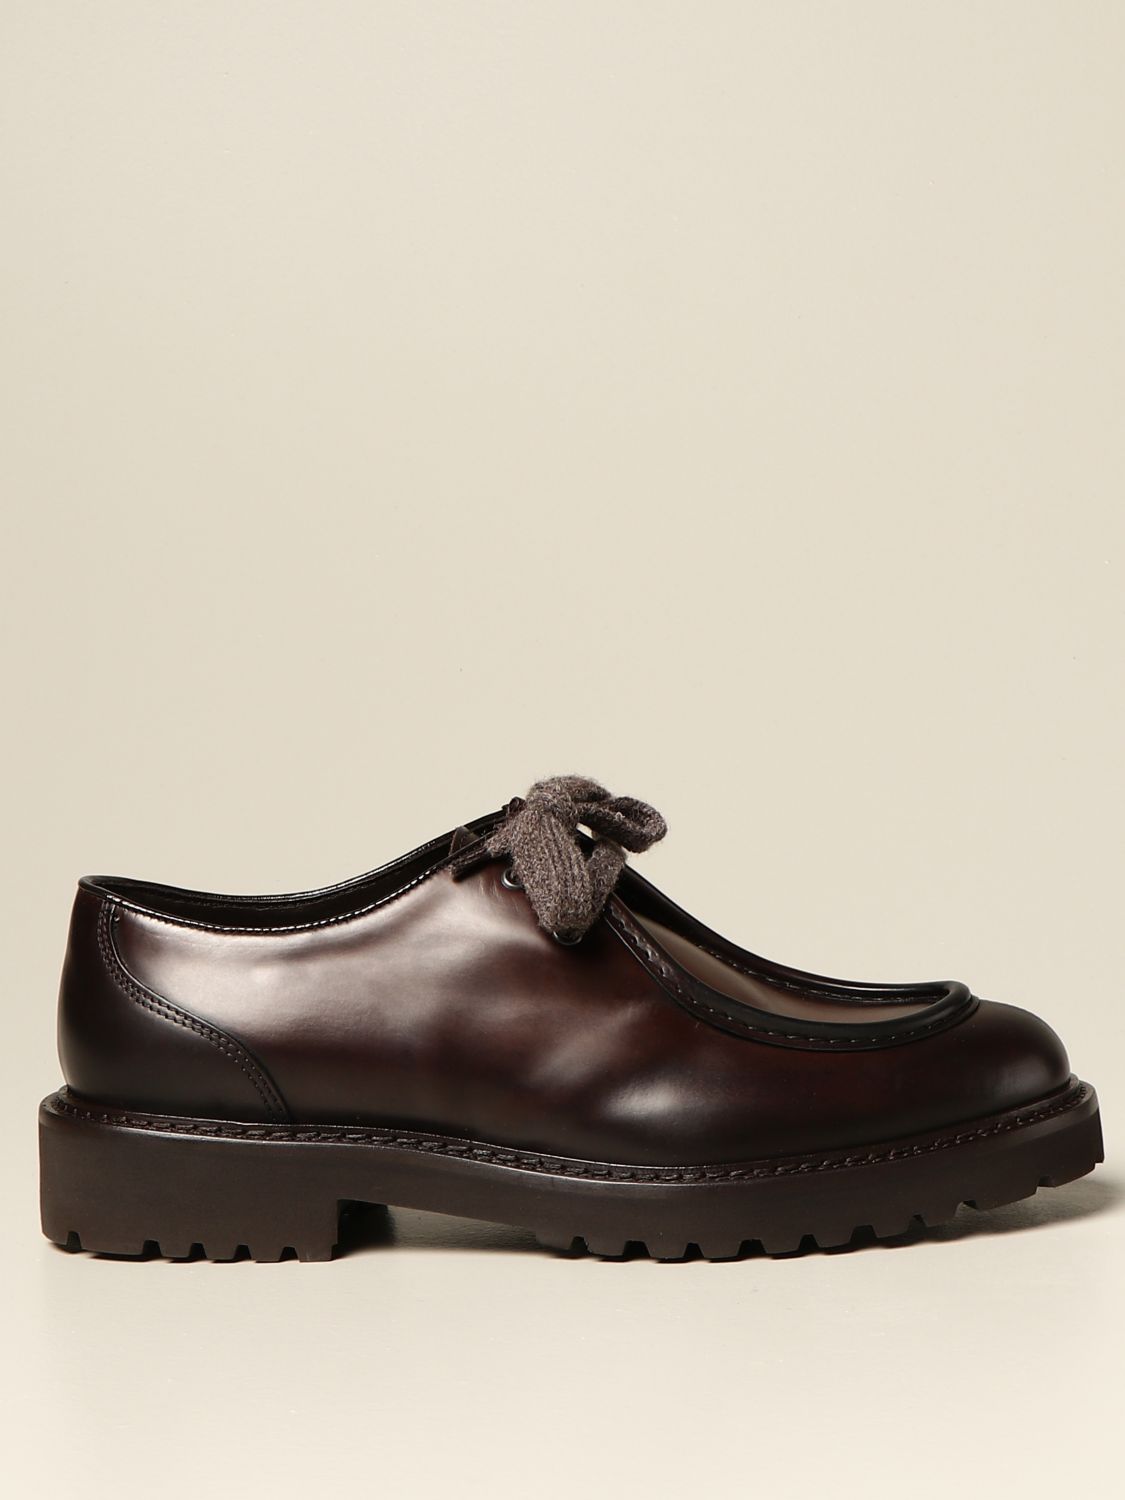 Doucal S Crimp In Smooth Leather Brogue Shoes Doucal S Men Brown Brogue Shoes Doucal S Du2737philuf087 Giglio En